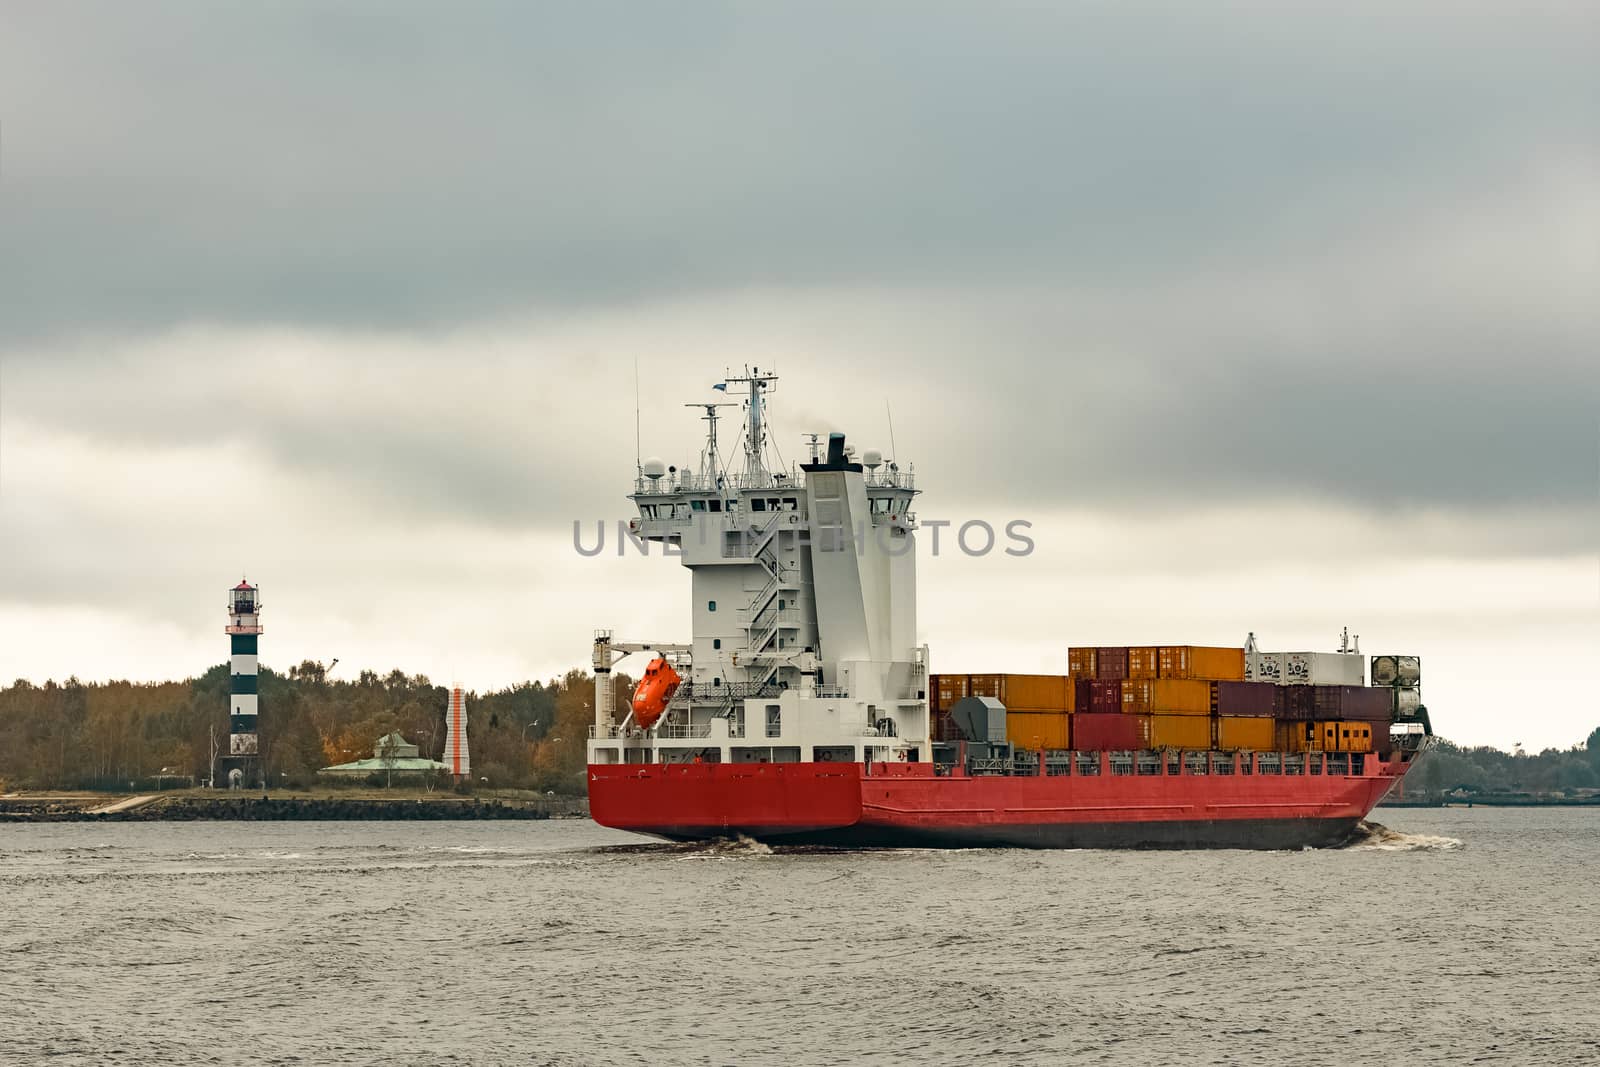 Red cargo container ship by sengnsp